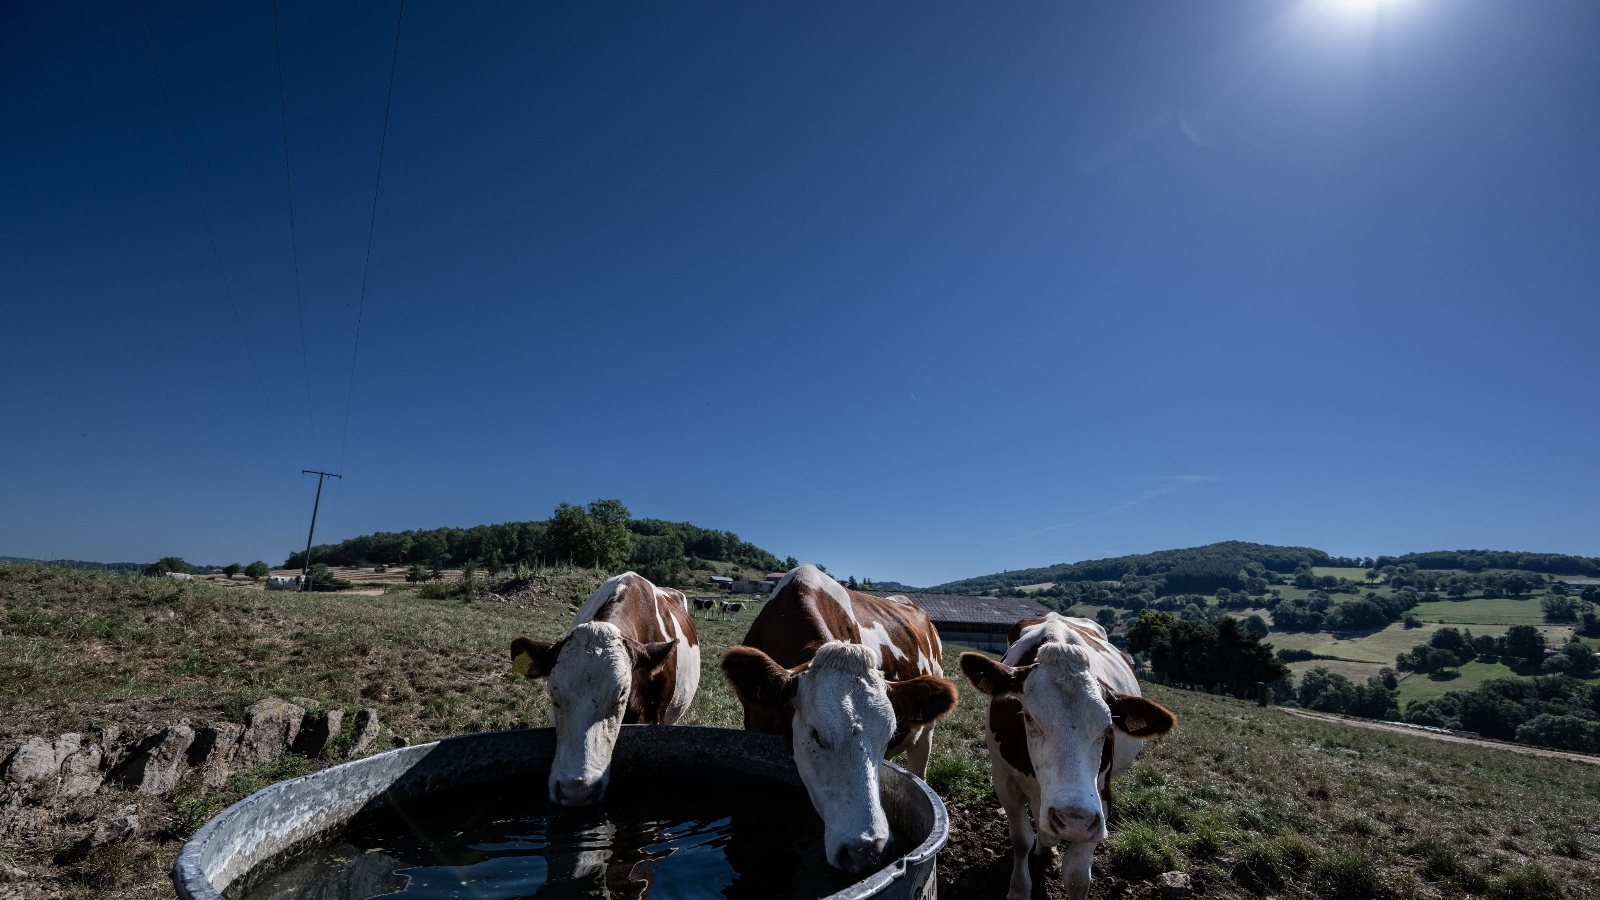 Dairy cows sip water during a heat wave in Saint-Martin-en-Haut, central France